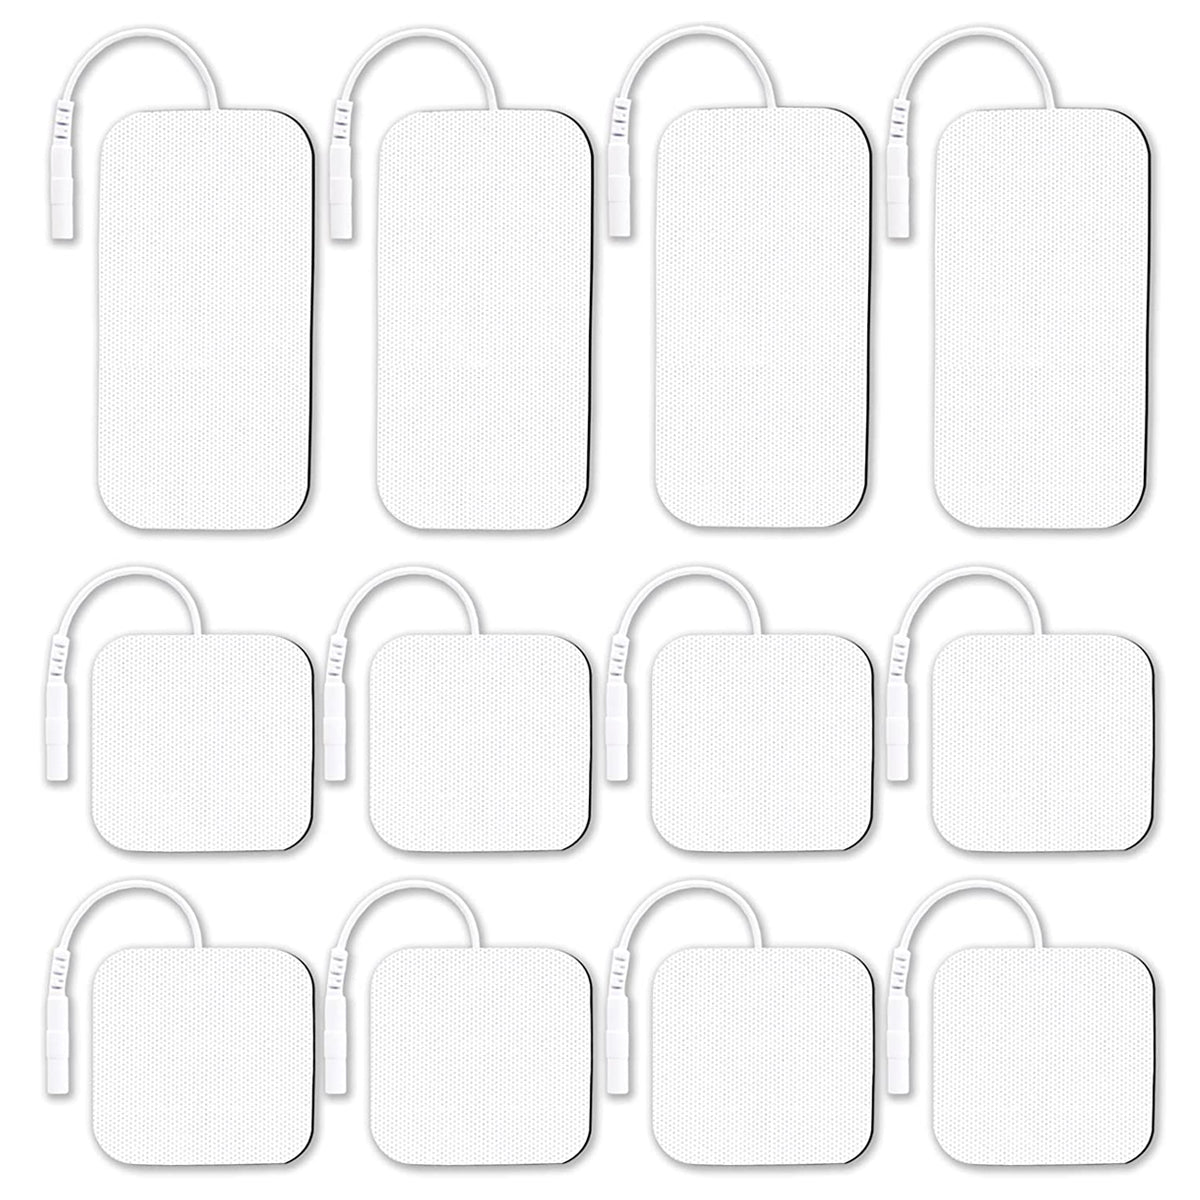 HANNEA 12 pcs Electrode Pads TENS Unit Pads, Electrode Replacement Patches with Upgraded Self-Stick Performance and Non-Irritating Design for Electrotherapy, 8 pcs 2 *2  and 4 pcs 2.36 *3.54